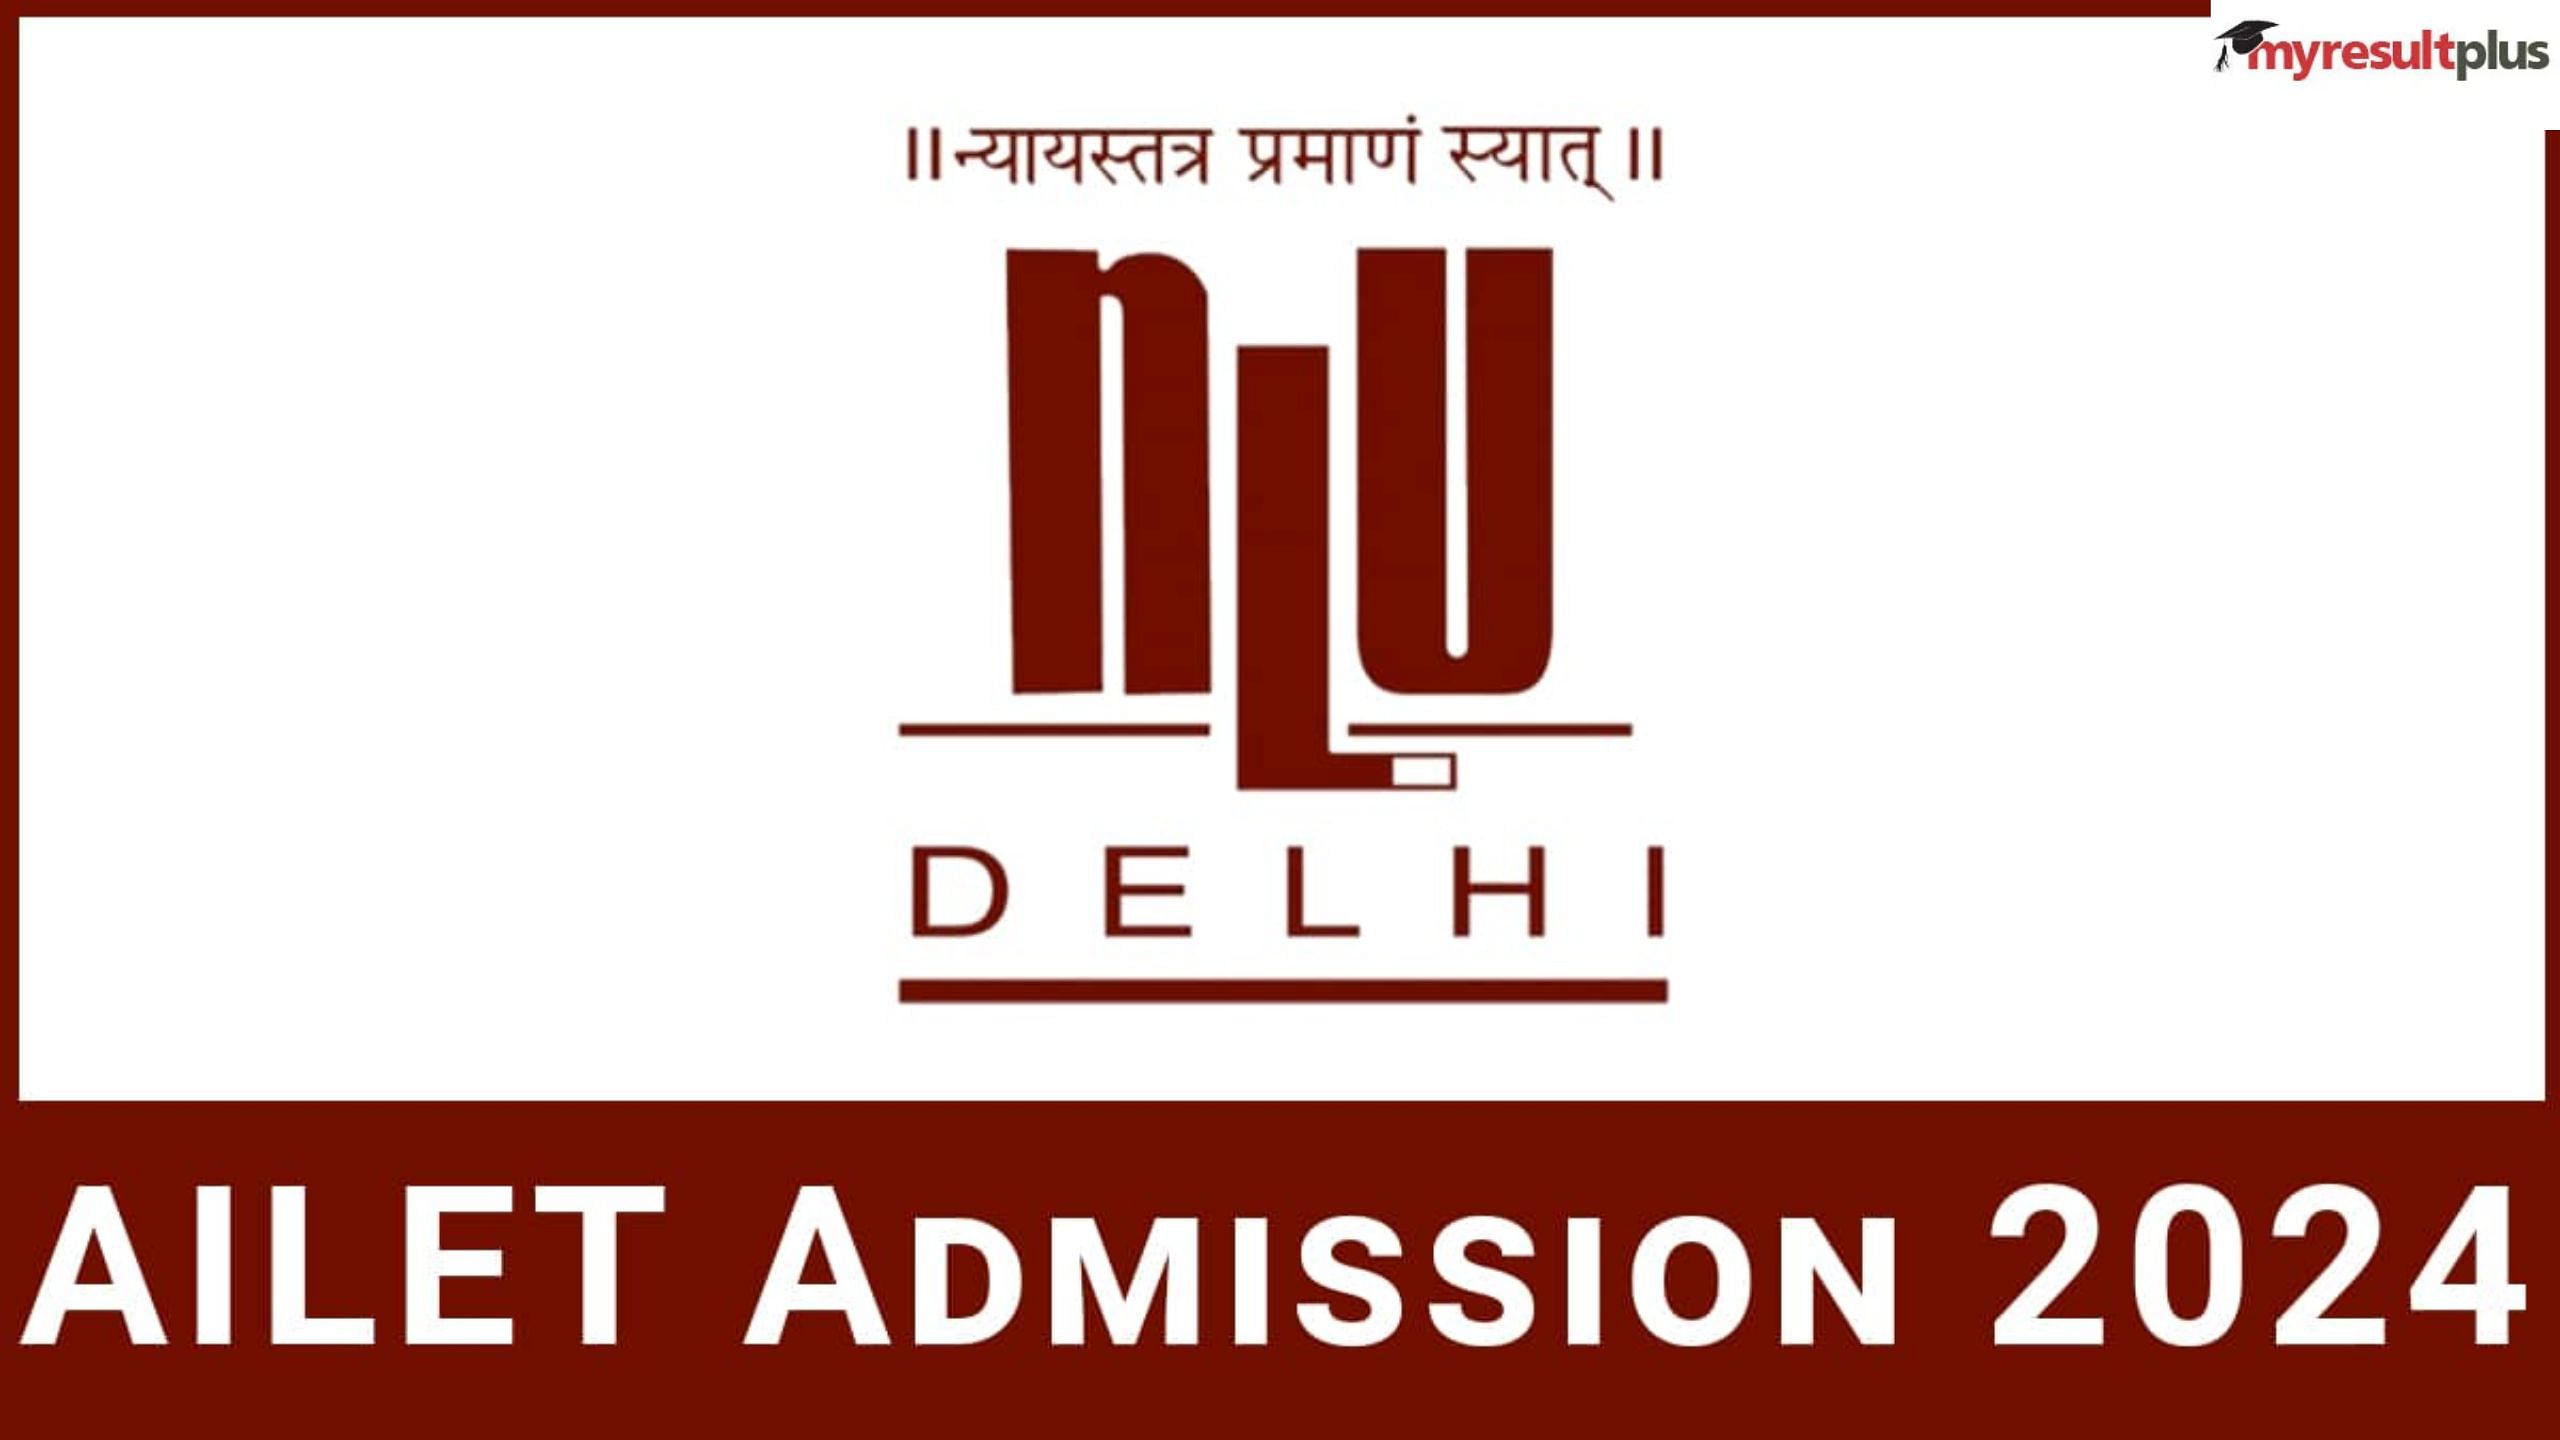 AILET 2024: Registration Starts Tomorrow for LLB, LLM & PhD at nludelhi.ac.in, Check Eligibility and More